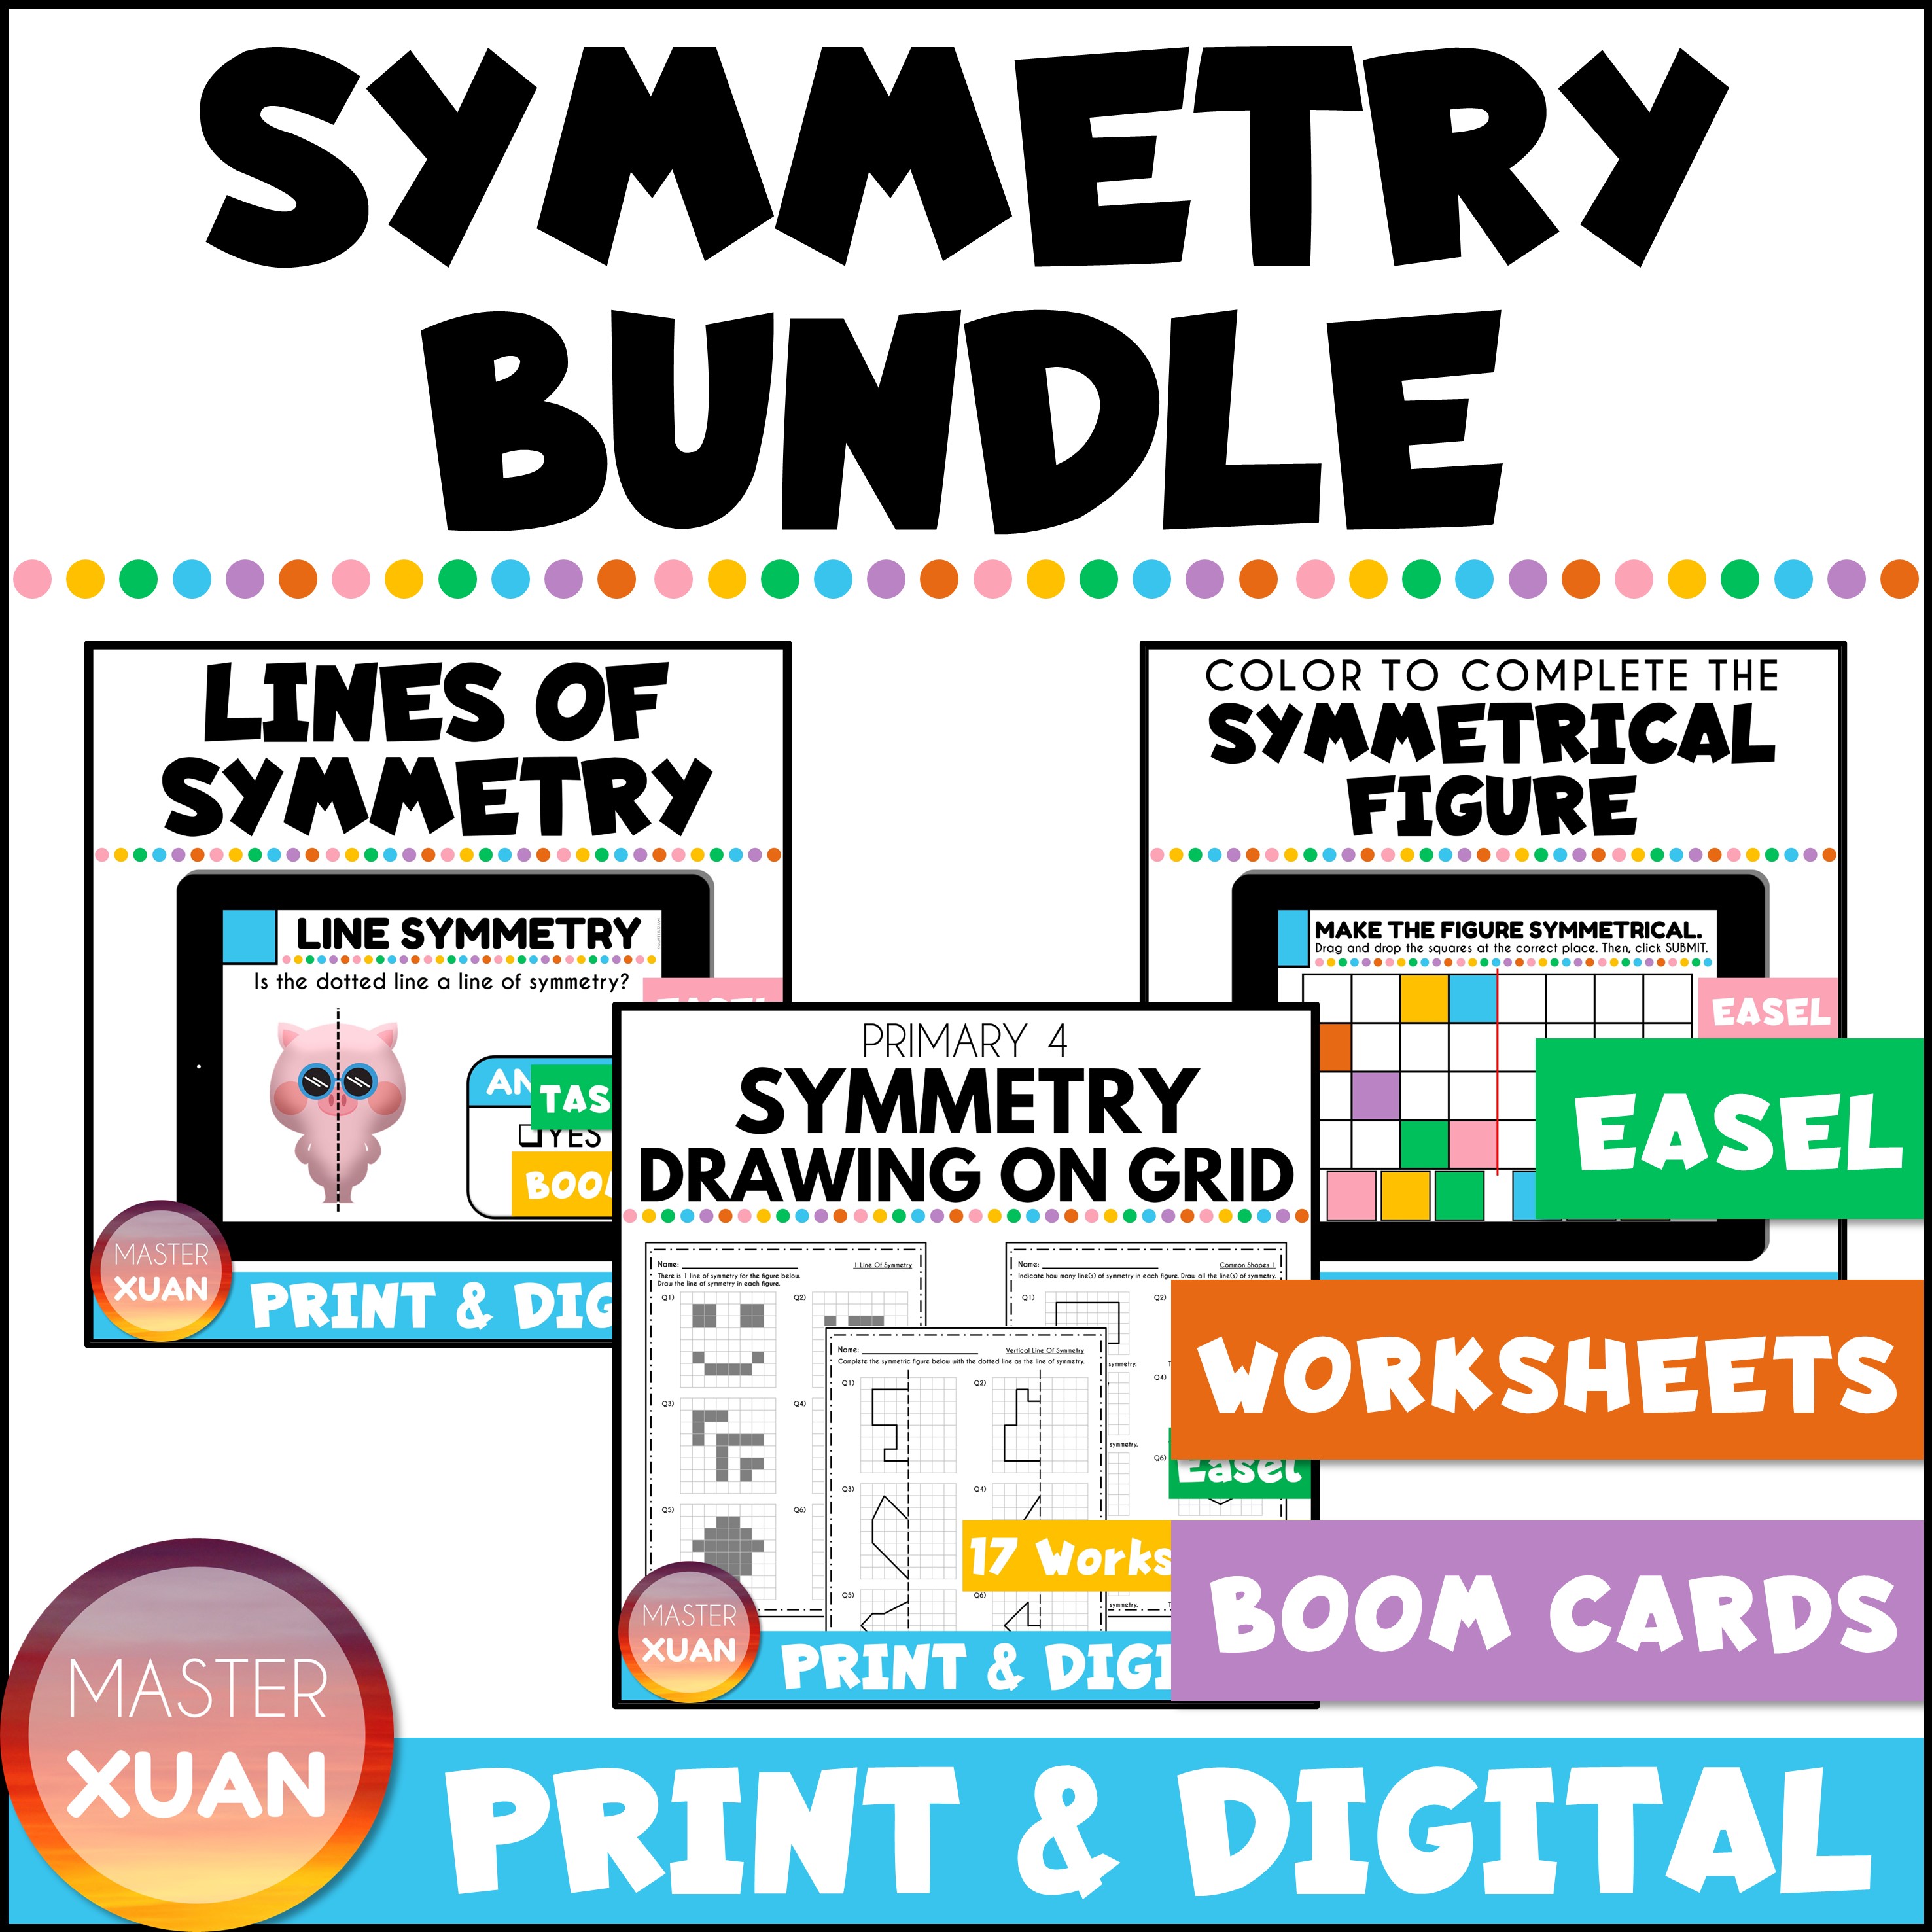 buy the lines of symmetry bundle at a discounted price!